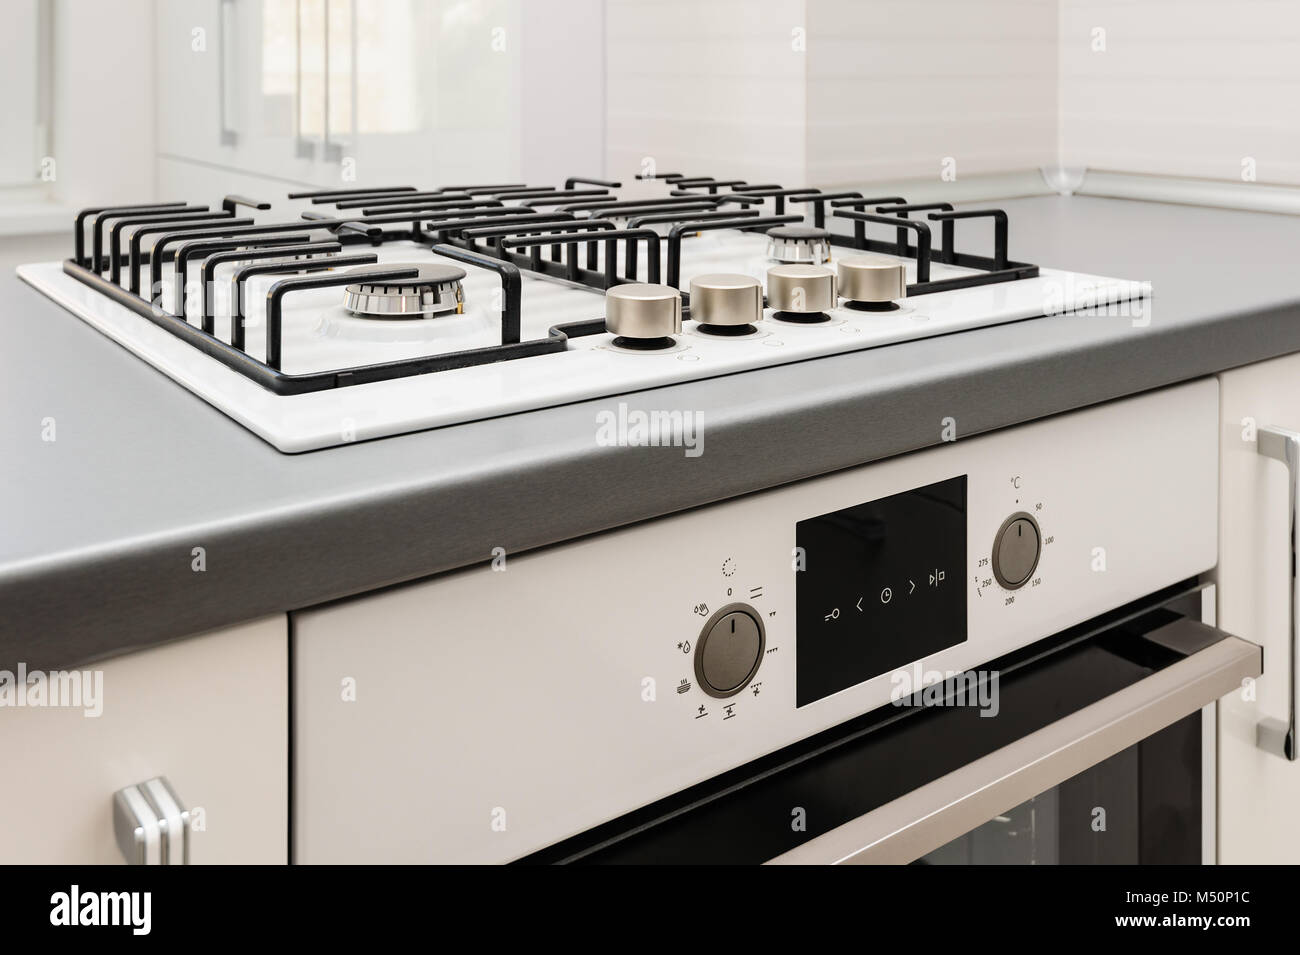 Brand new gas stove and embedded oven Stock Photo